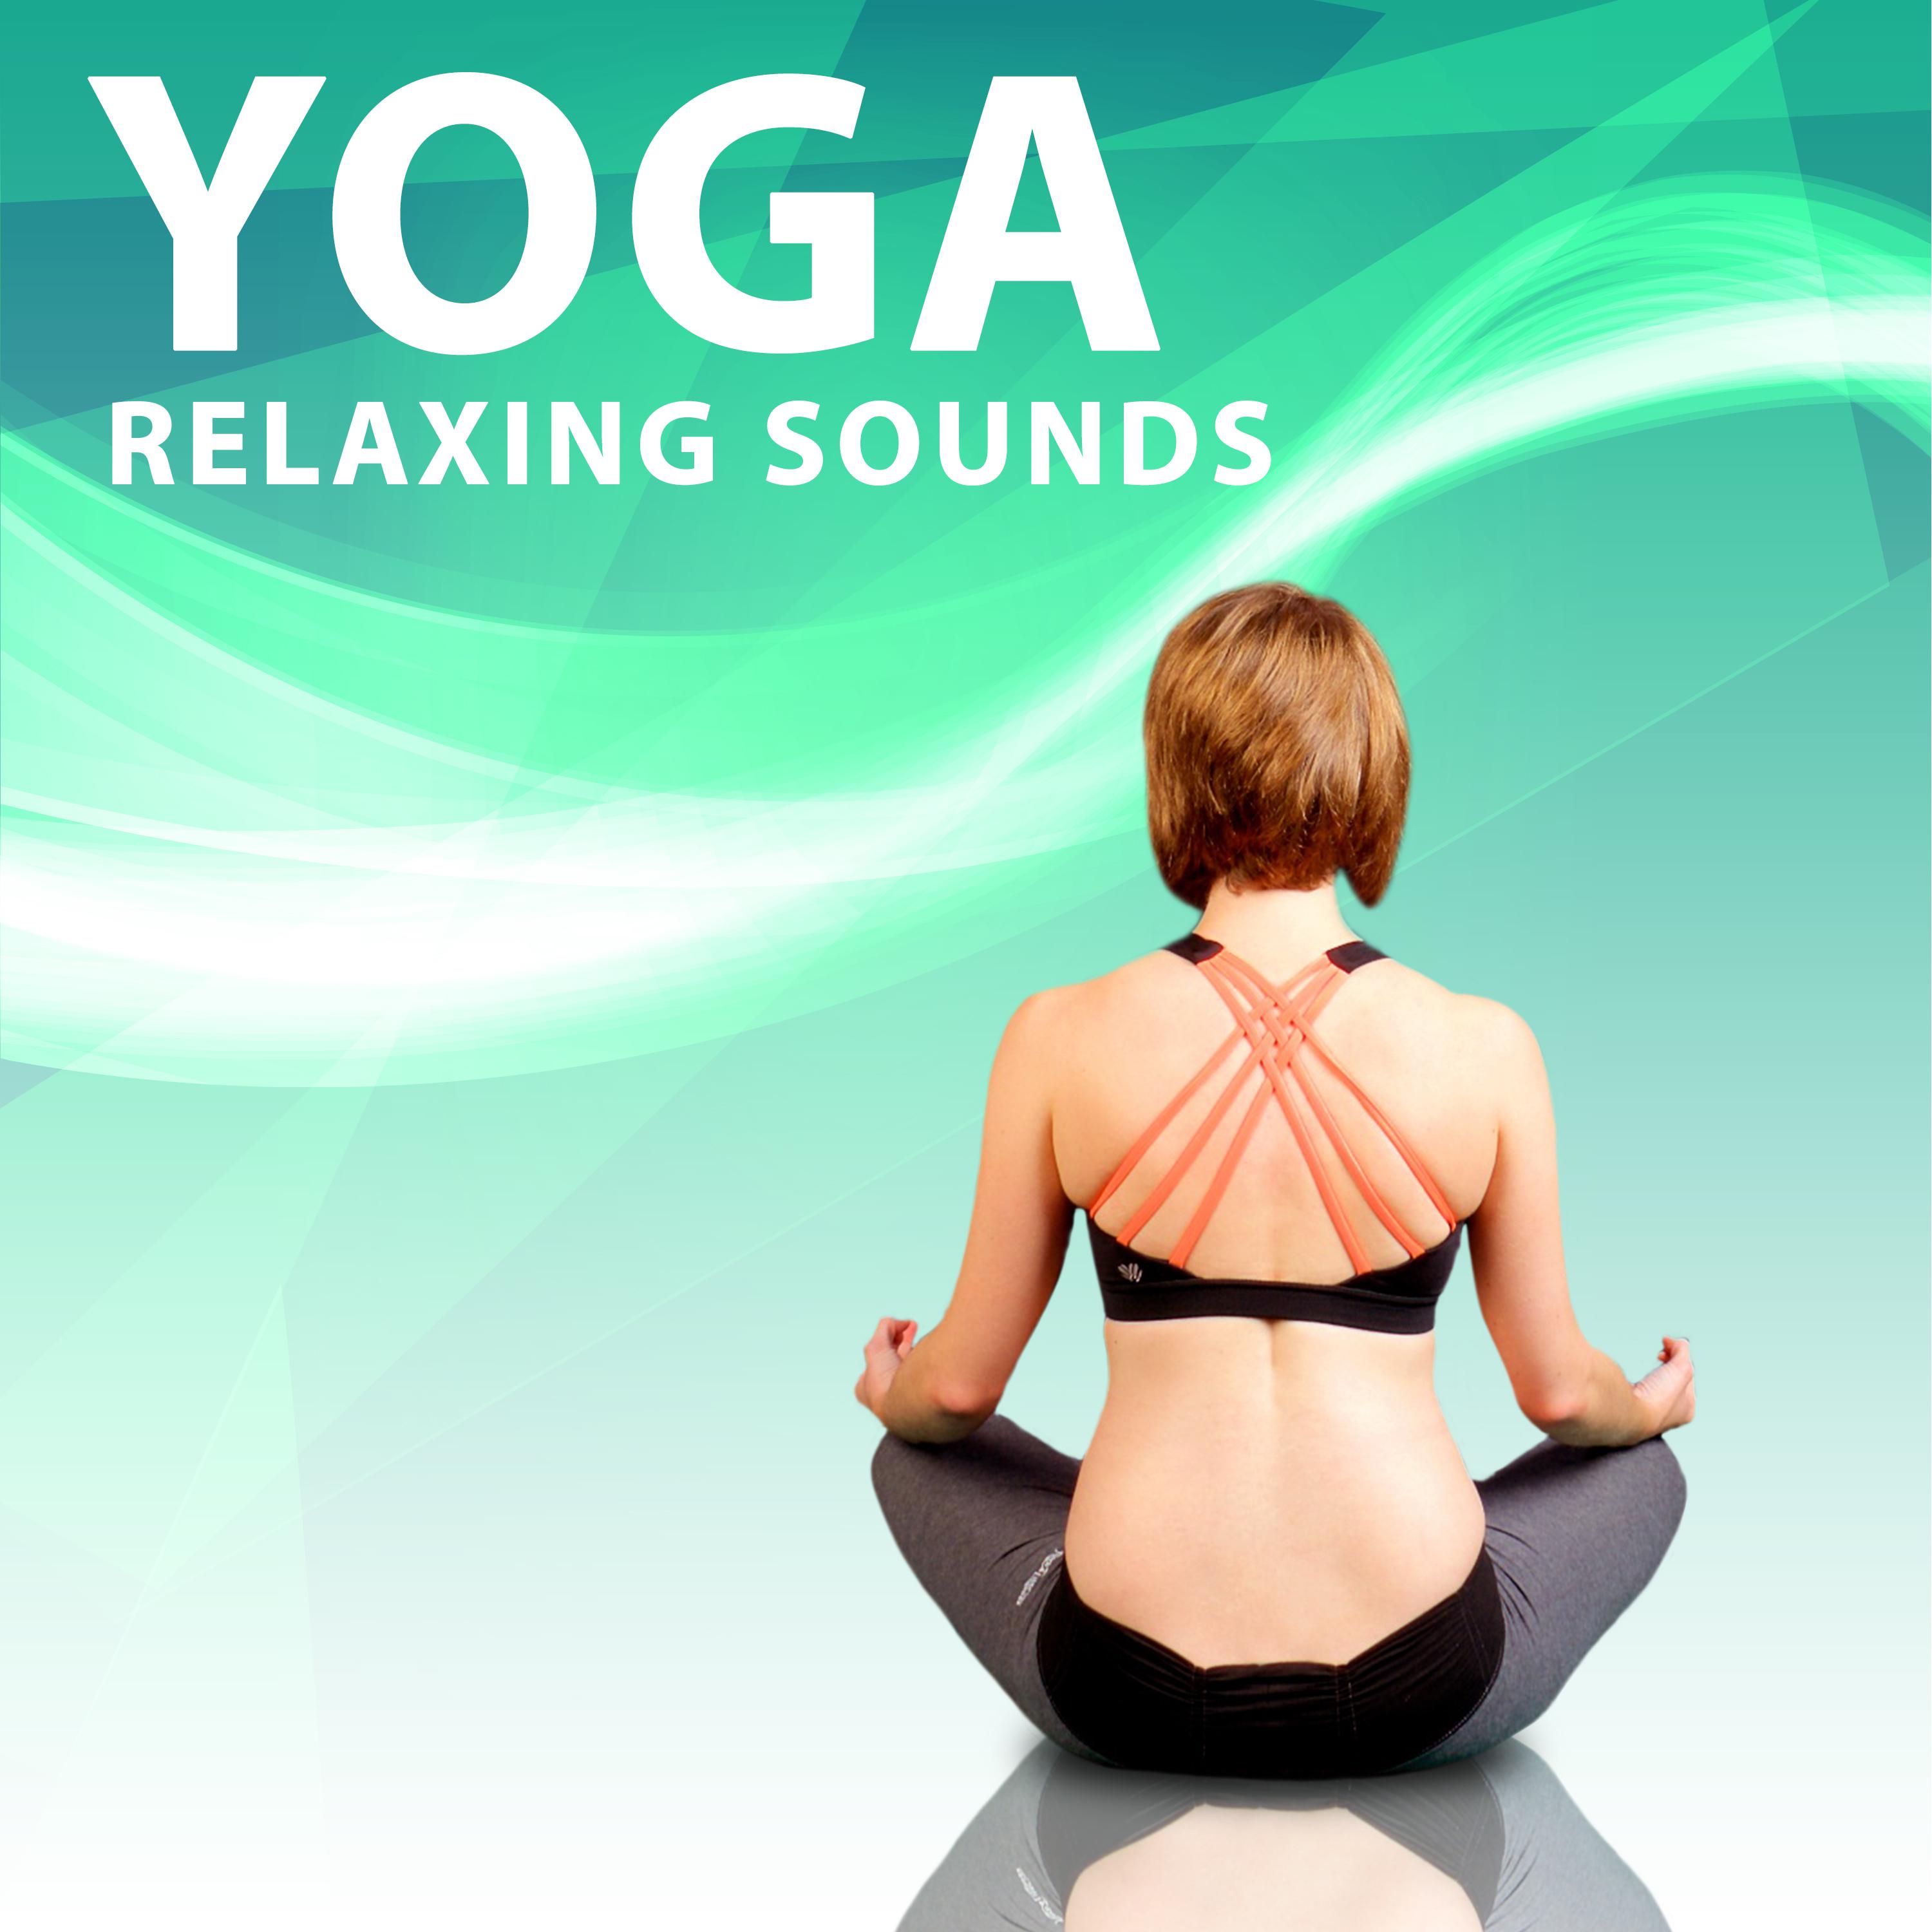 Yoga Relaxing Sounds – Soft New Age Music, Yoga Calmness, Soothing Sounds, Training Time